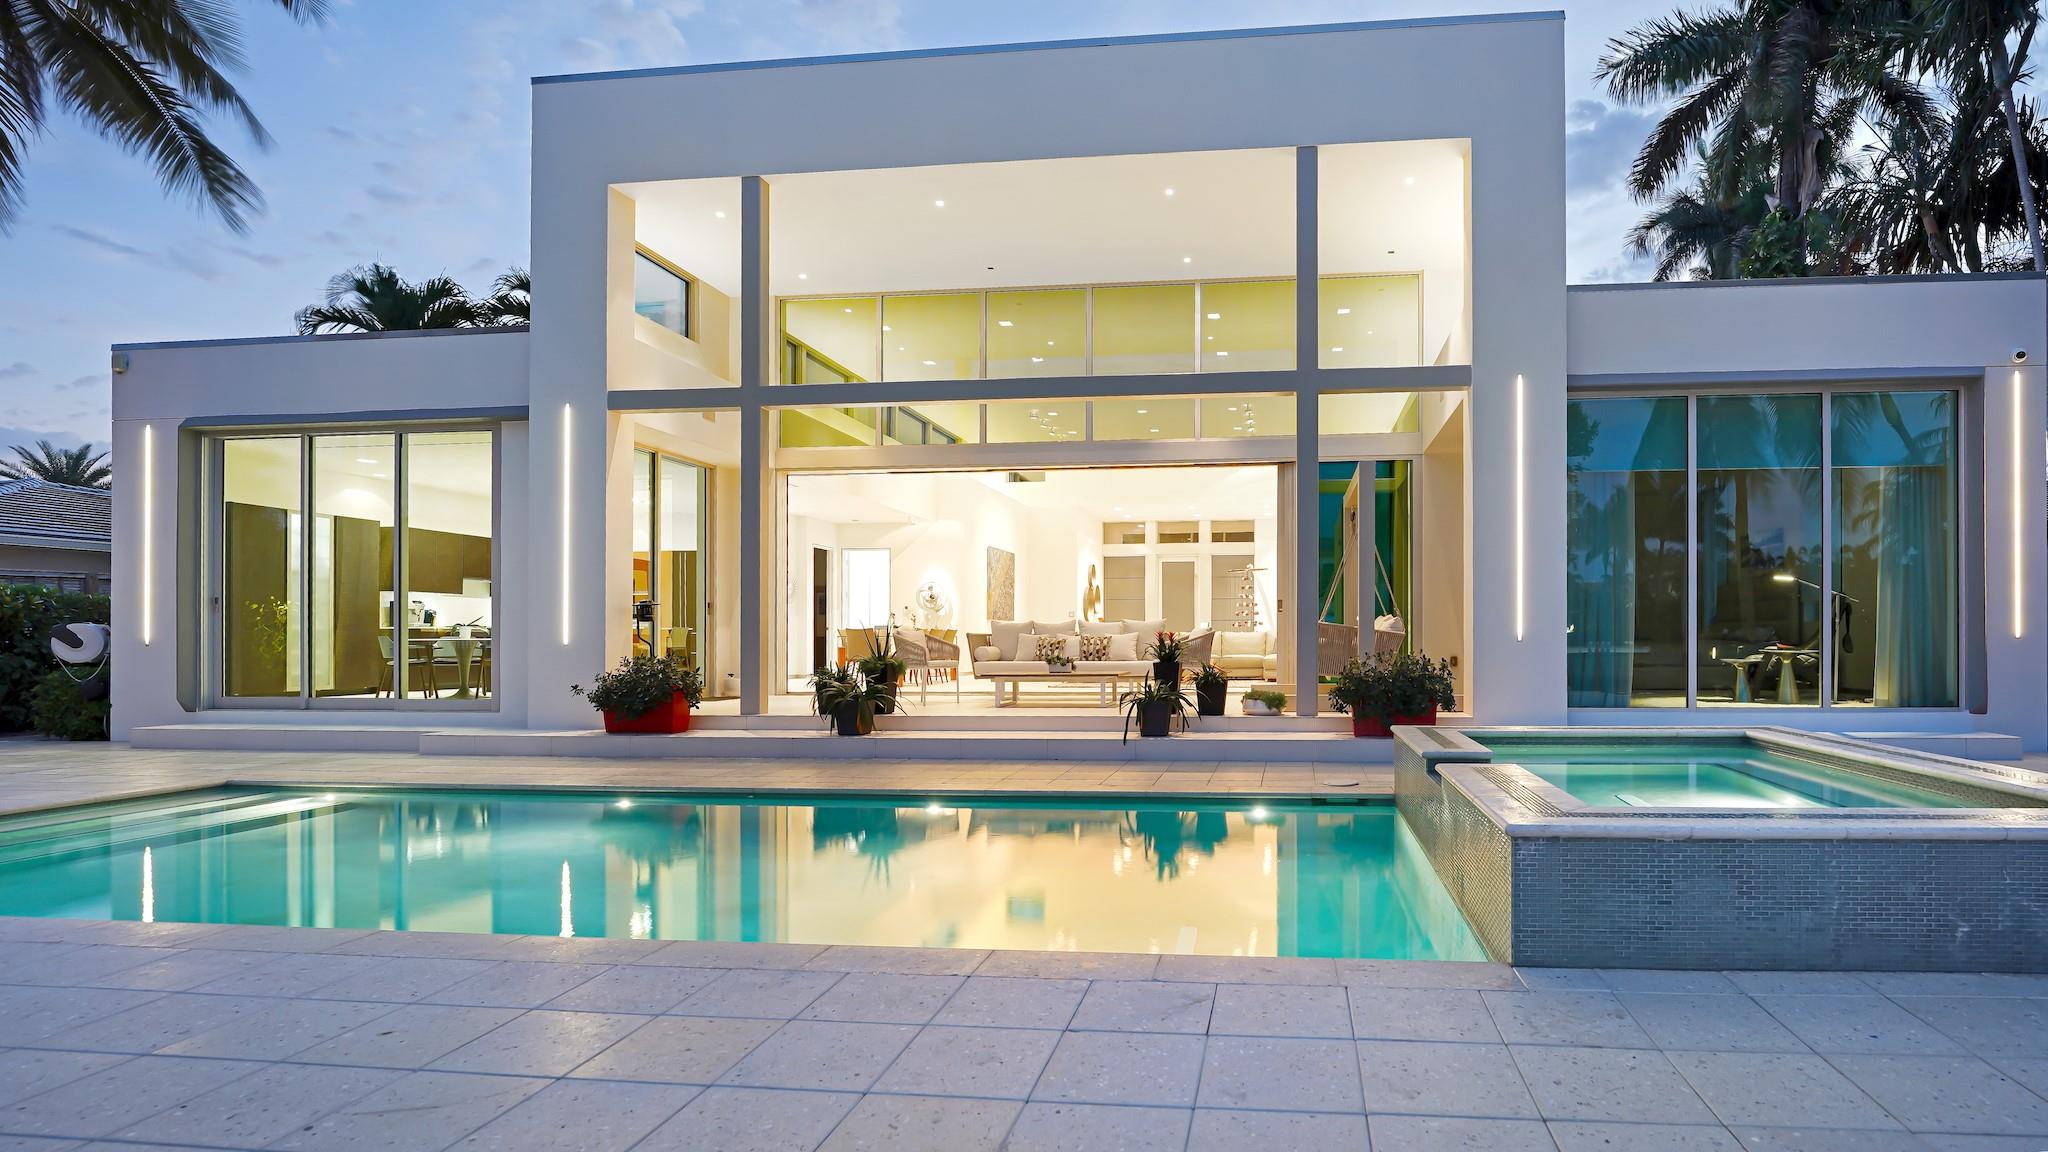 Discover a rare one-story contemporary waterfront in Seven Isles Las Olas neighborhood. Designed by architect John Gerra, this residence epitomizes seamless integration of modern elements. Gerra's expertise blends materials & techniques, creating spaces w/ natural light by day & LED ambiance by night. Reglet base & door framing. Enter Fleetwood glass door, then greeted by soaring 17-foot spaces adorned w/ transom glass & accentuated by fully retractable sliding glass. A single-level pool deck seamlessly extends to the concrete-pavered dock w/ LED pile lighting. Motorized shades, Crestron control, SieMatic German cabinetry cabinetry, Sub-Zero/Wolf appliances, tankless gas water heaters, natural gas cooking + generator, whole-house water filtration & an epoxy decked oversized garage.